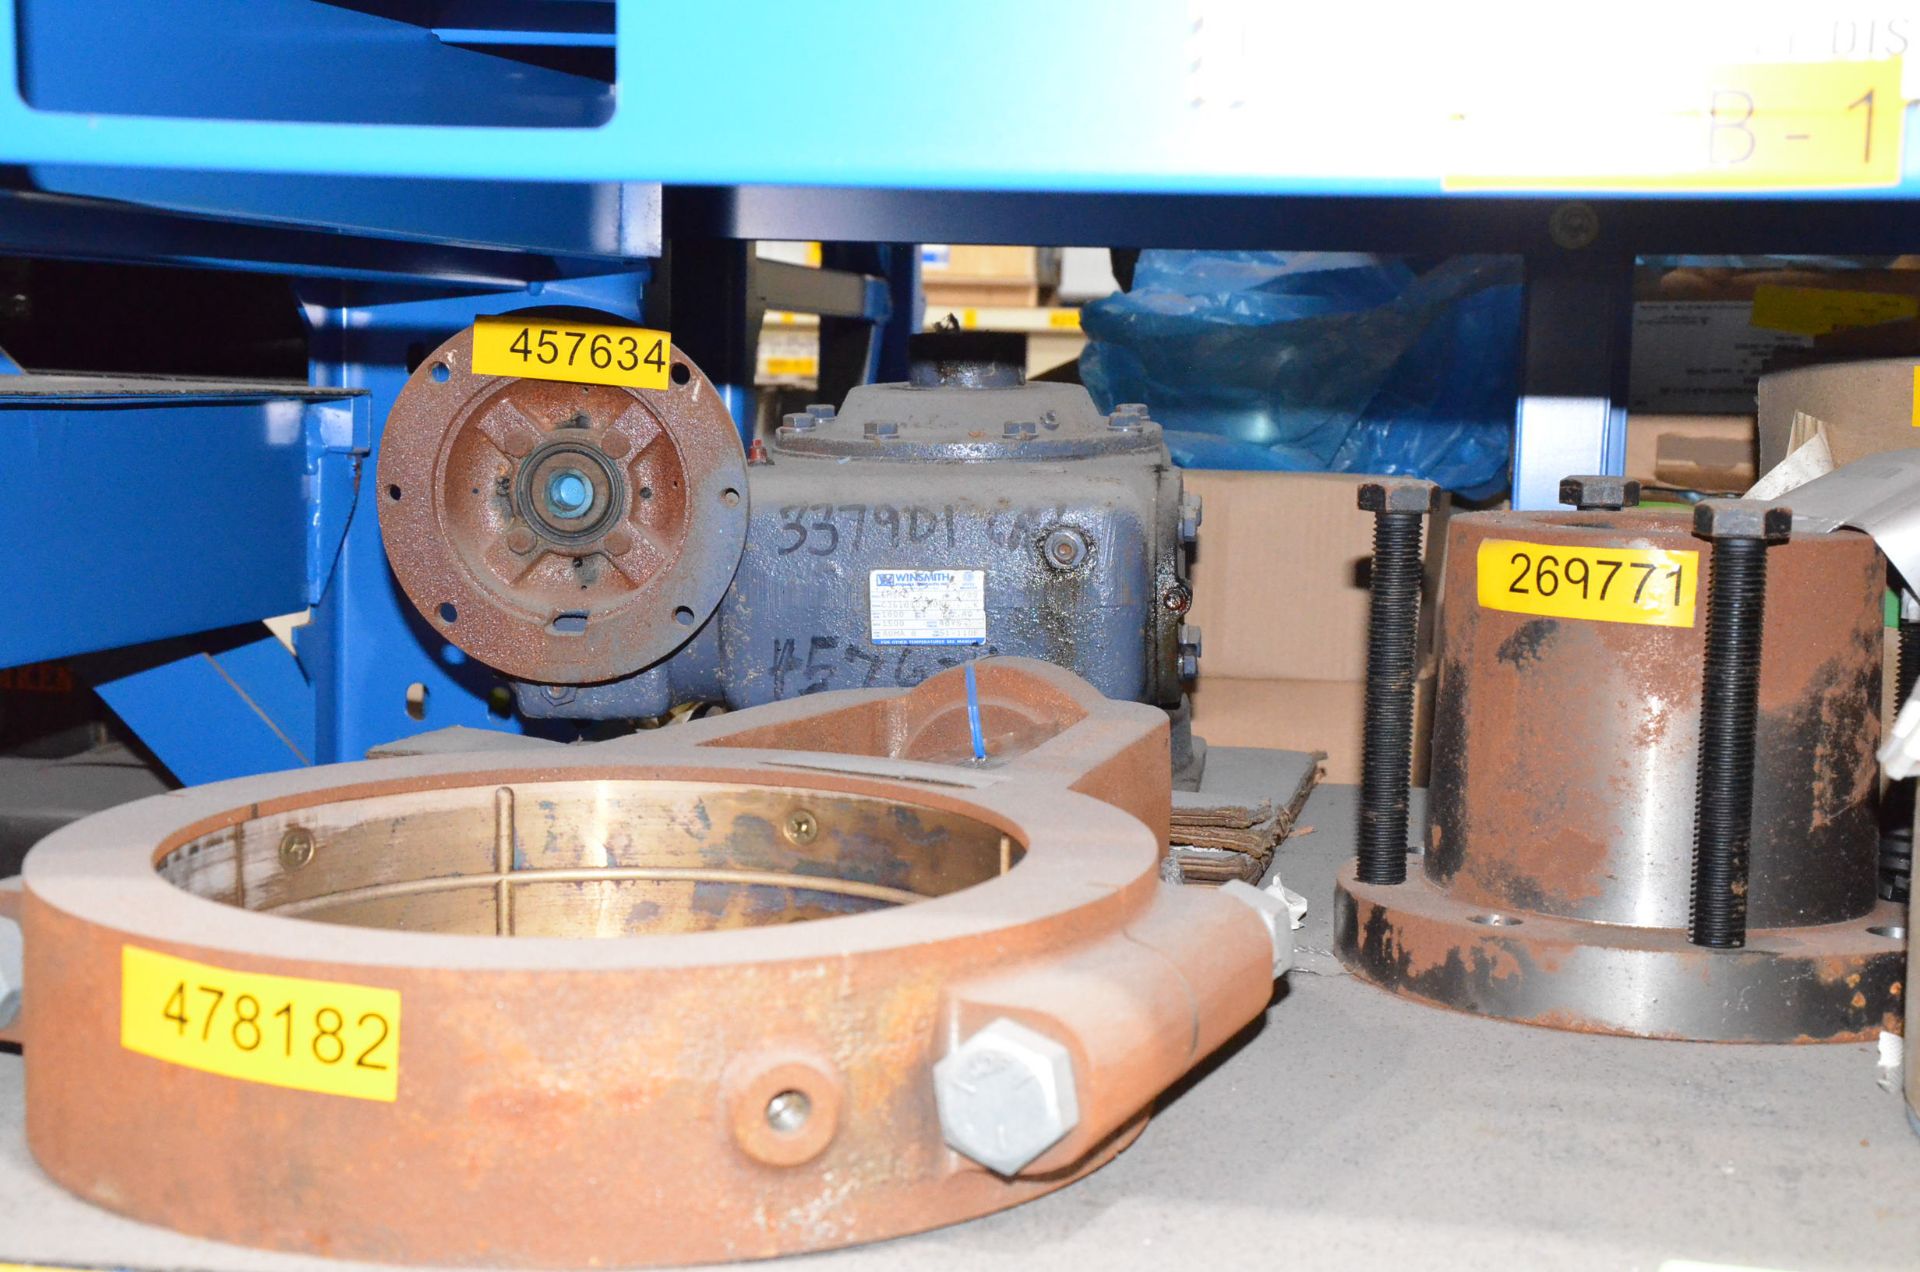 LOT/ CONTENTS OF SHELF - BALDOR SHEAVES, HUB COUPLINGS AND GEAR REDUCER - Image 3 of 3